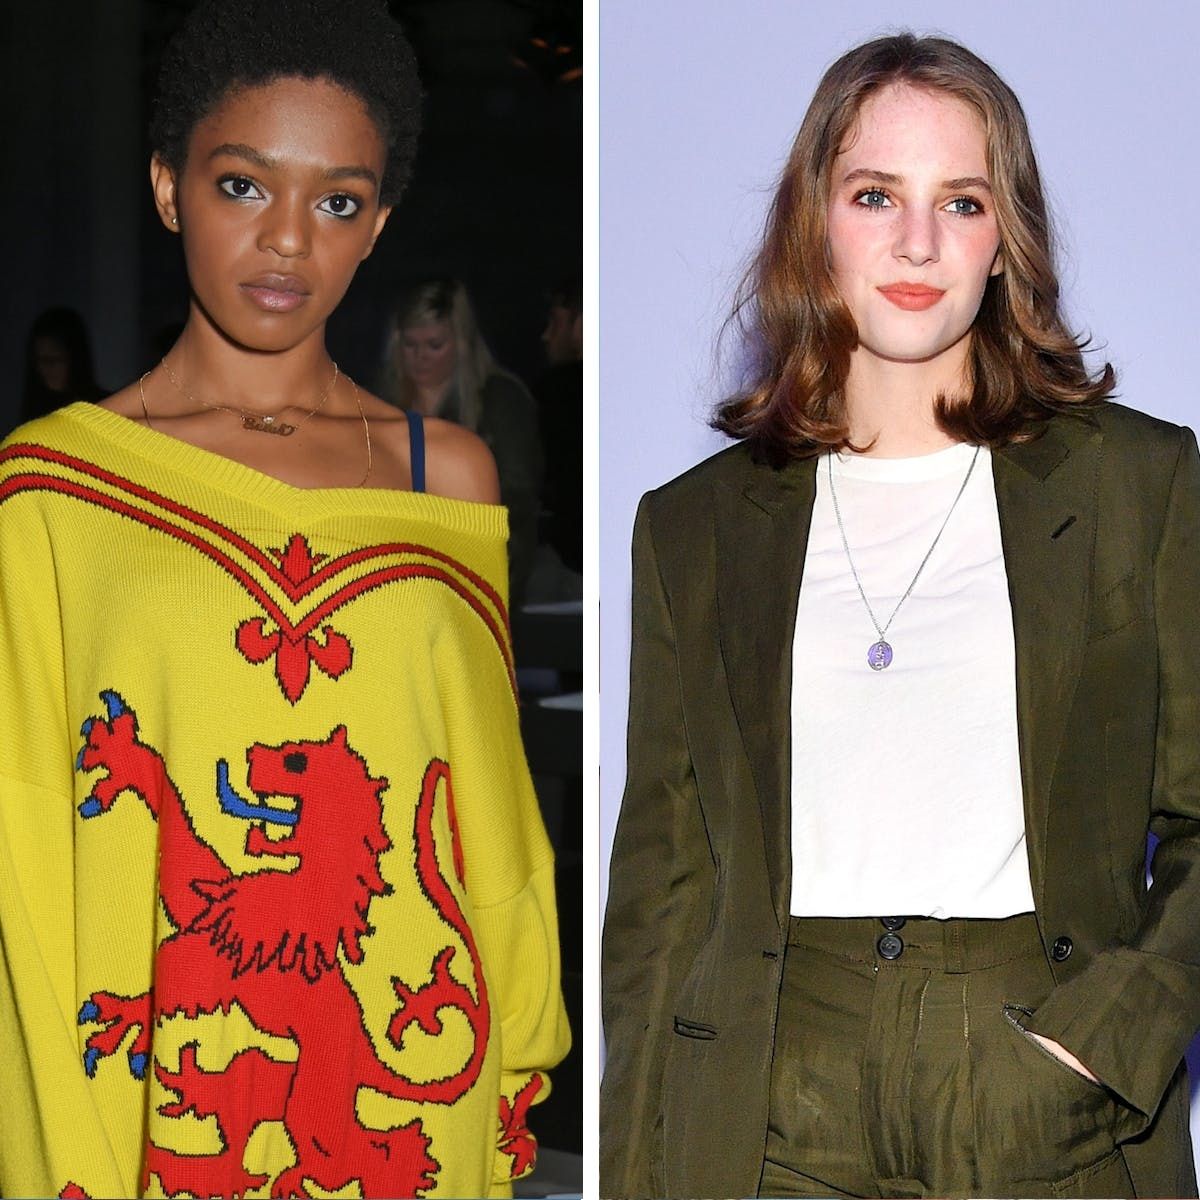 This Fresh Crop of Fashionable Celeb Offspring Should Be on Your Radar STAT